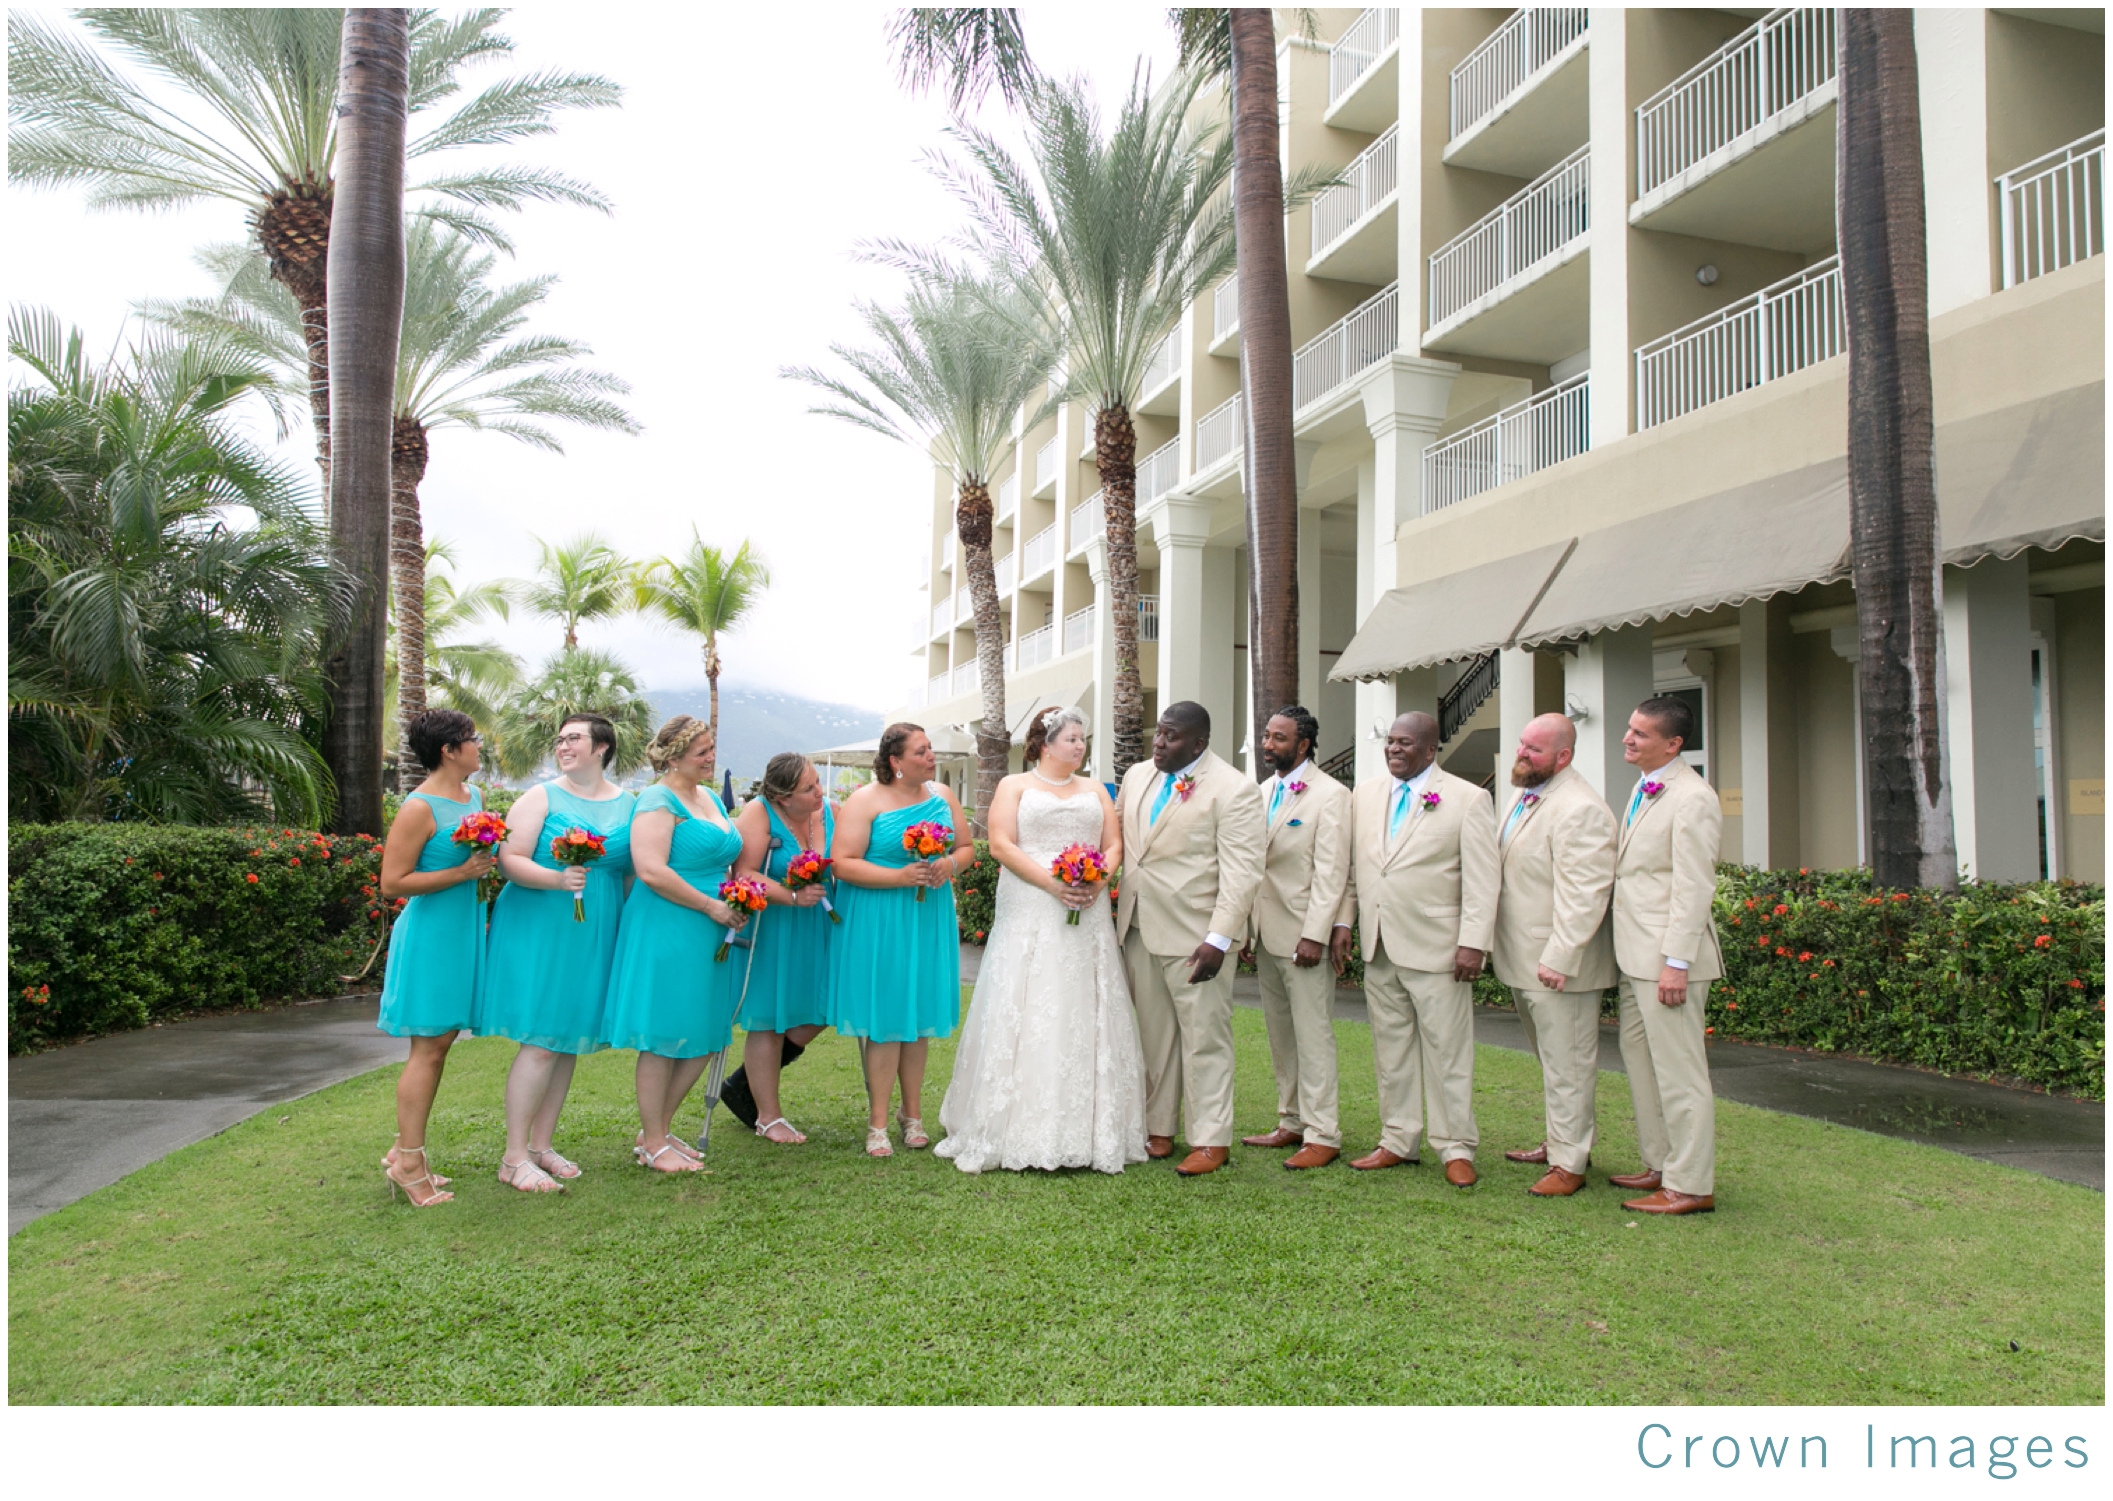 st thomas wedding photos at the marriott crown images_1703.jpg